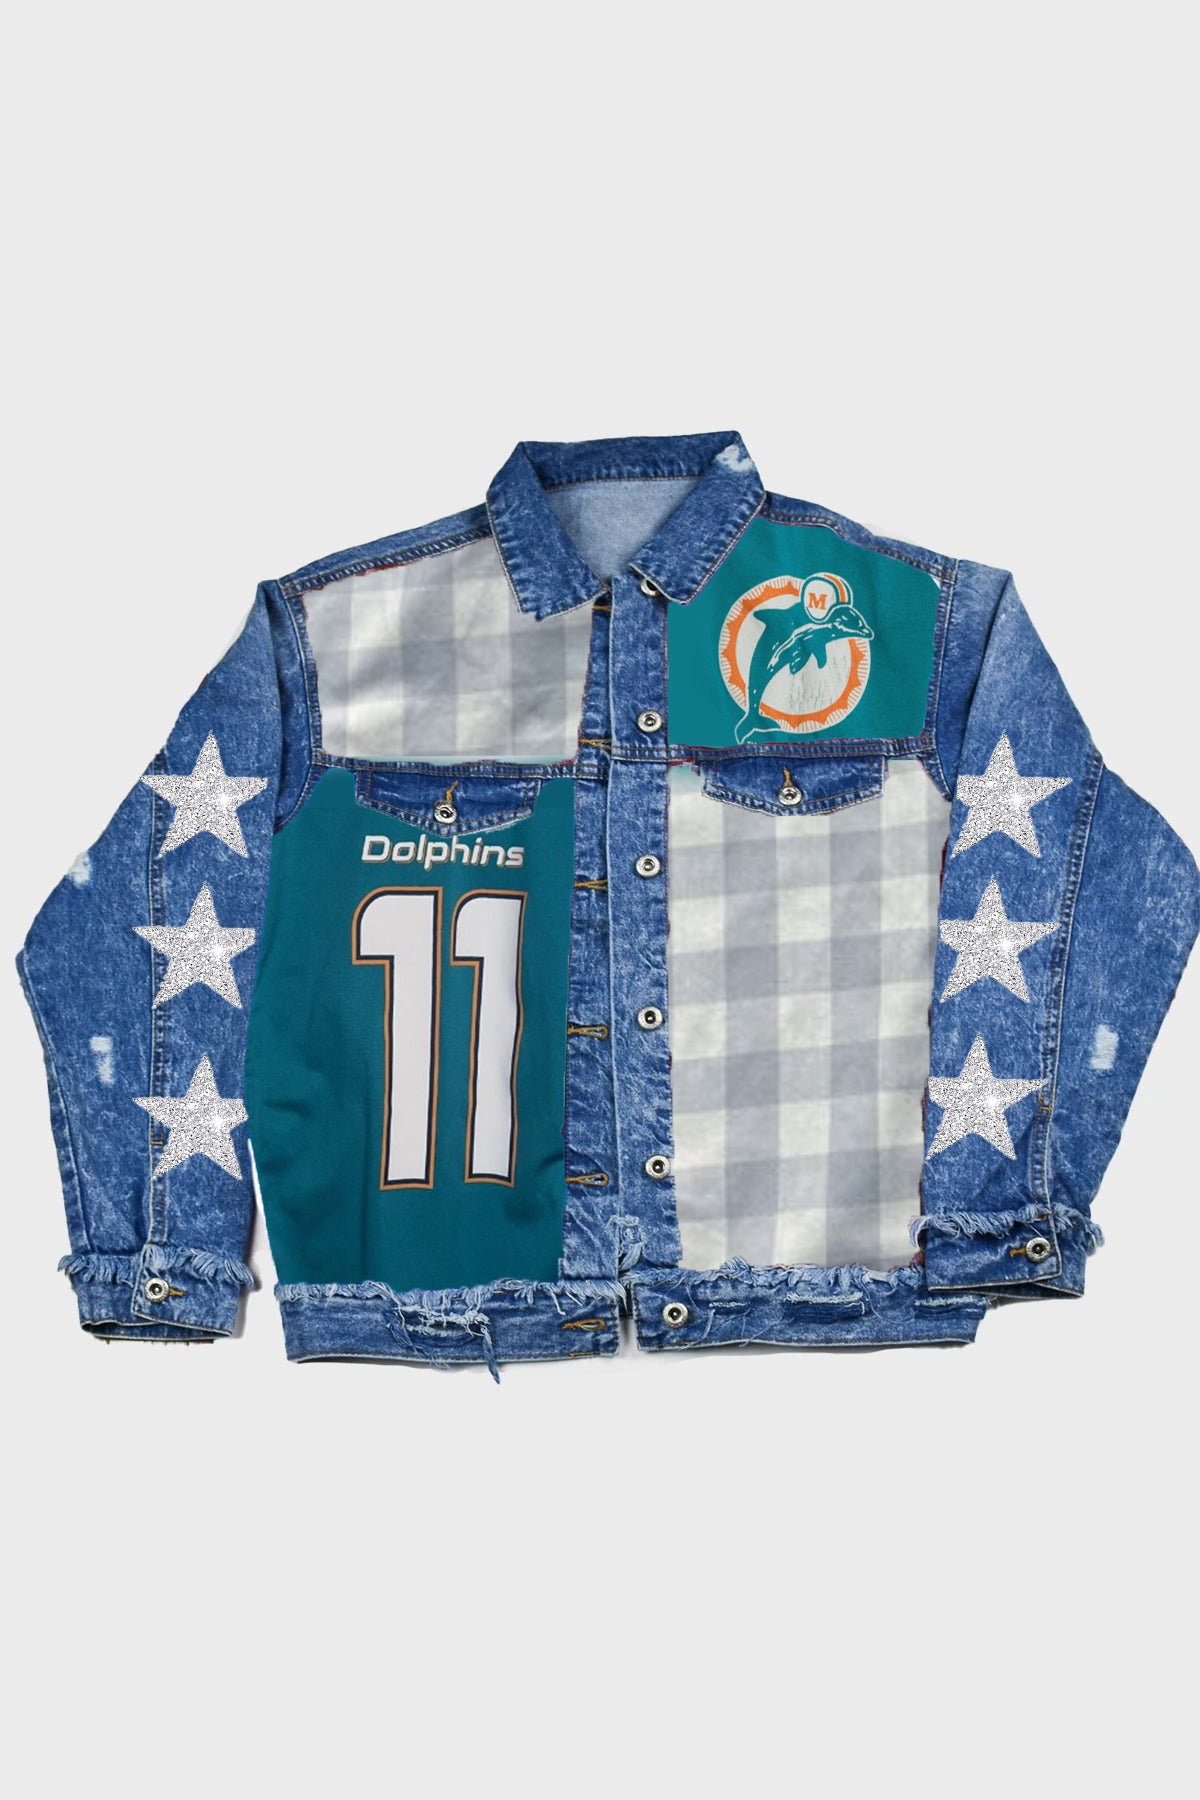 Upcycled Dolphins Star Patchwork Jacket